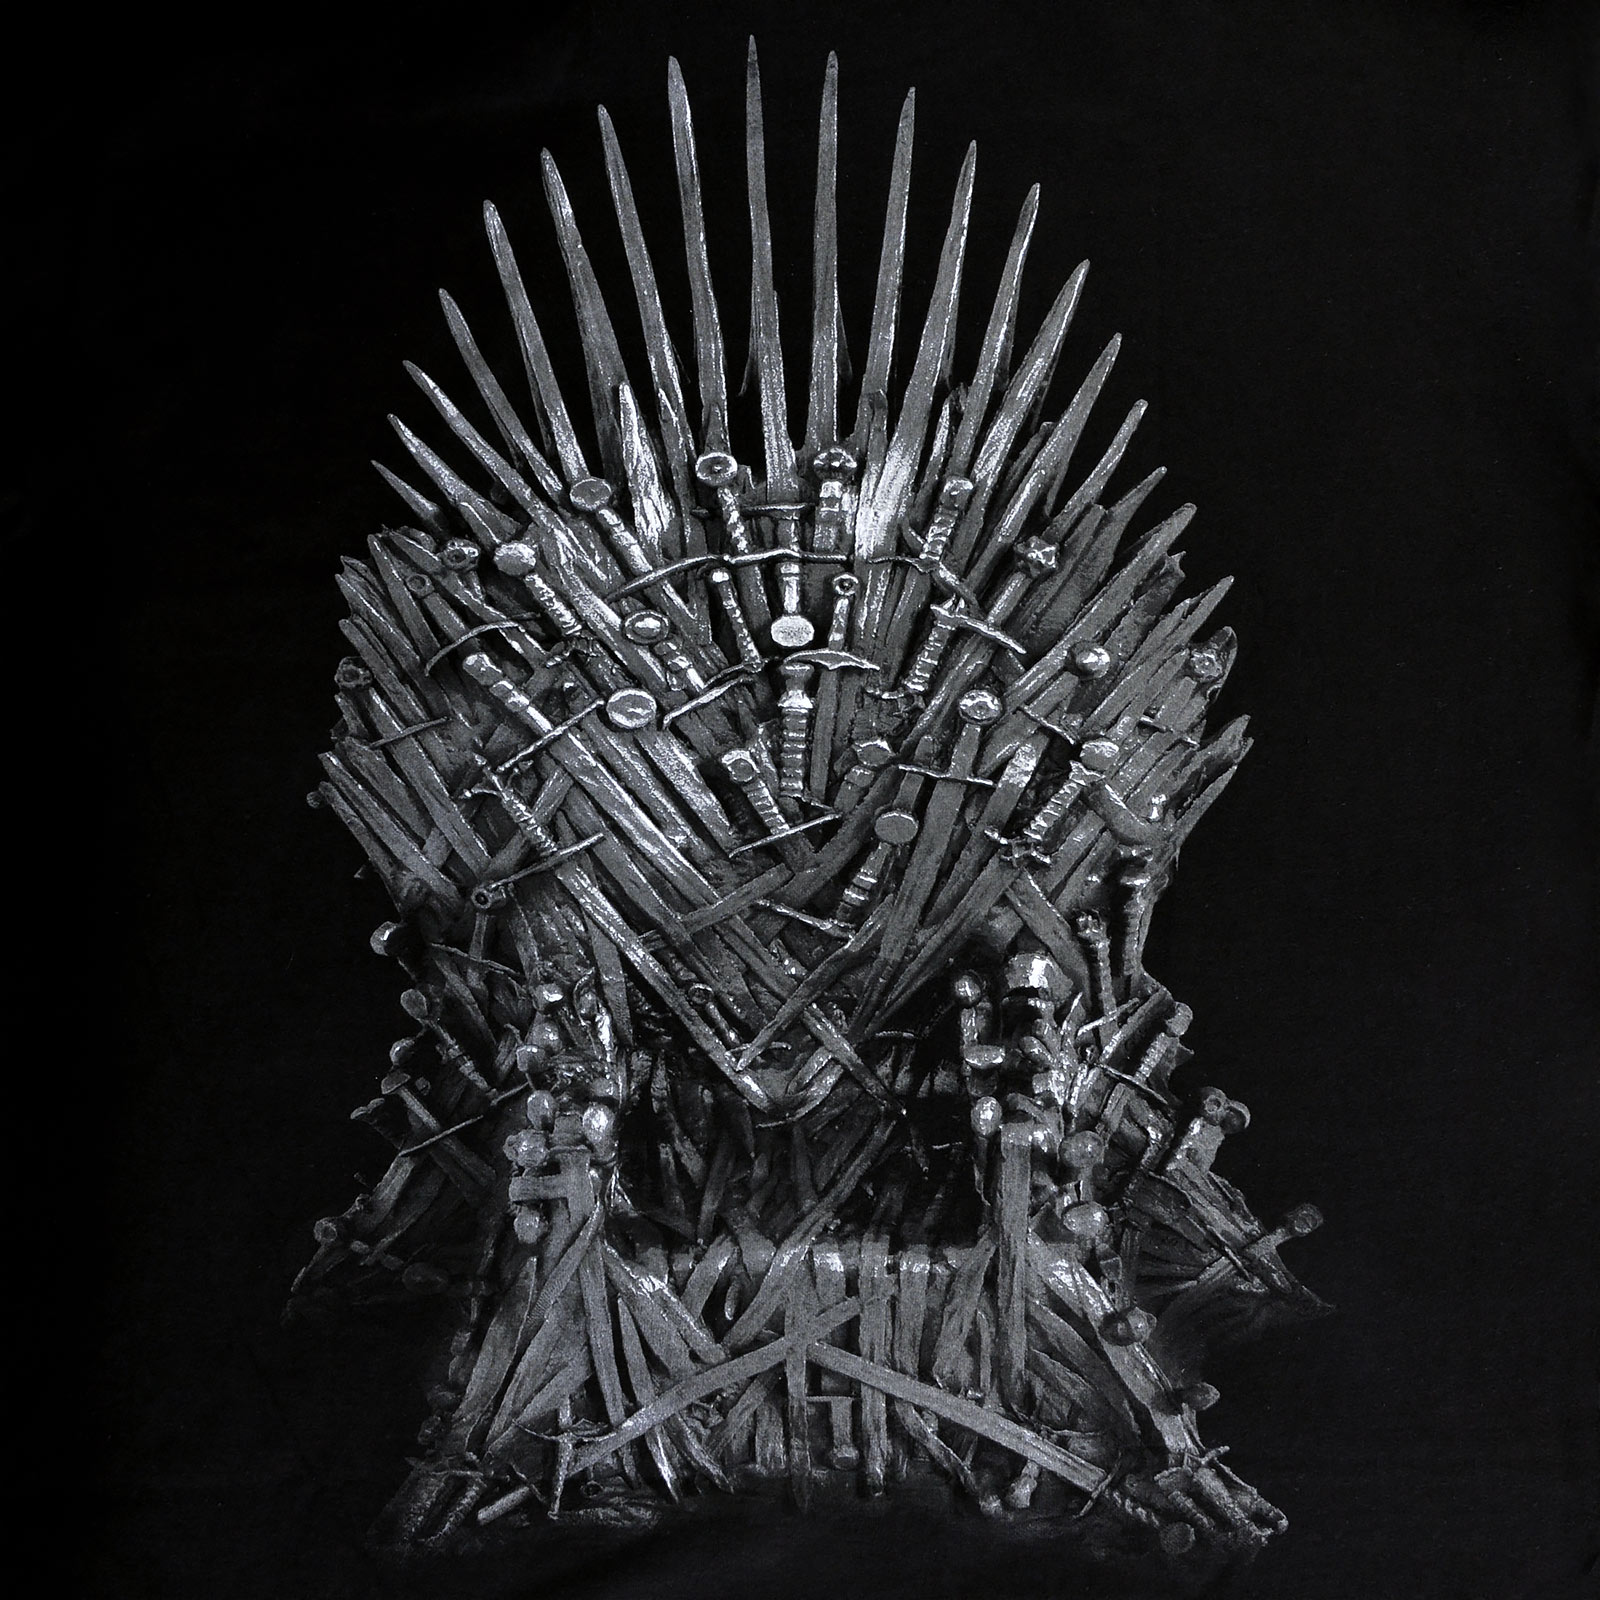 Game of Thrones - The Iron Throne T-Shirt